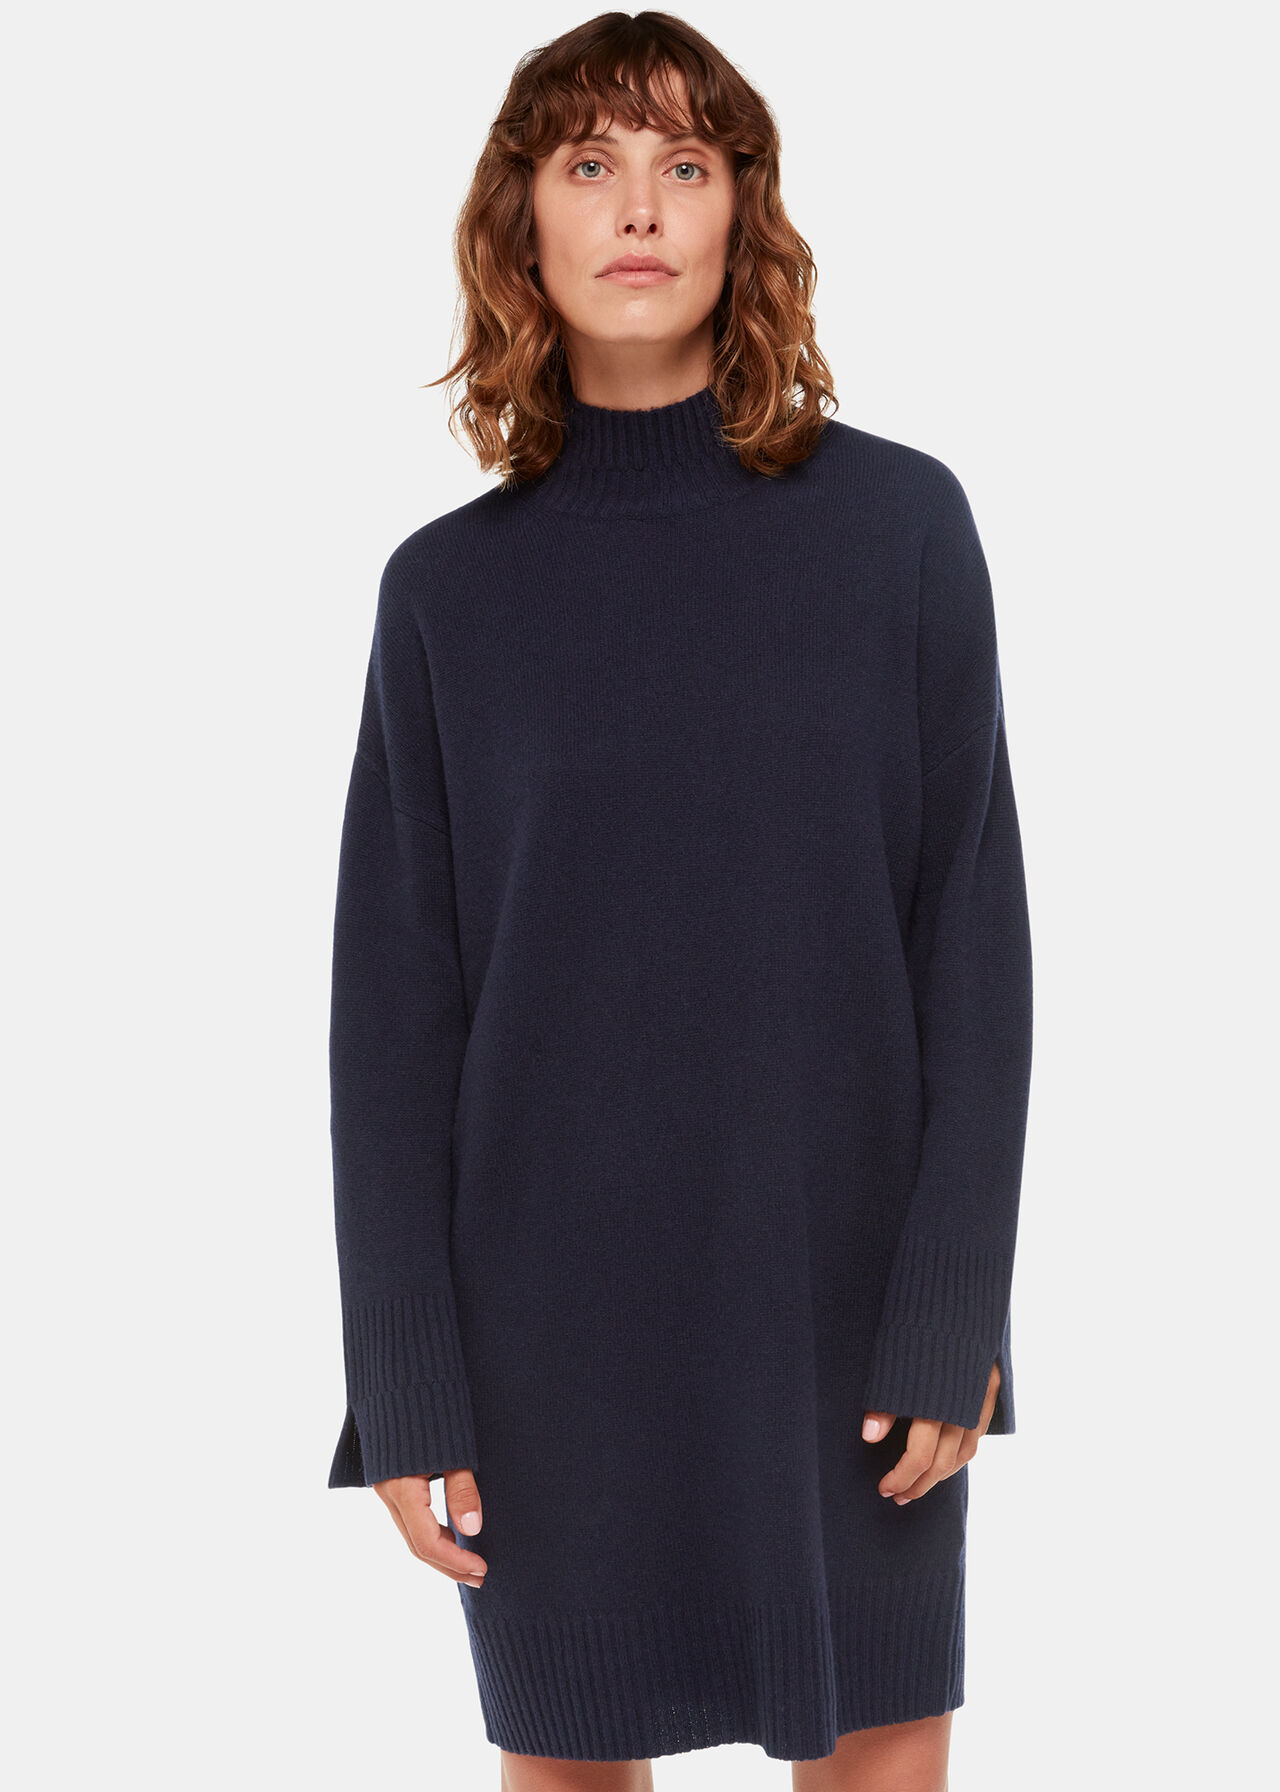 Navy Amelia Wool Knitted Dress, WHISTLES